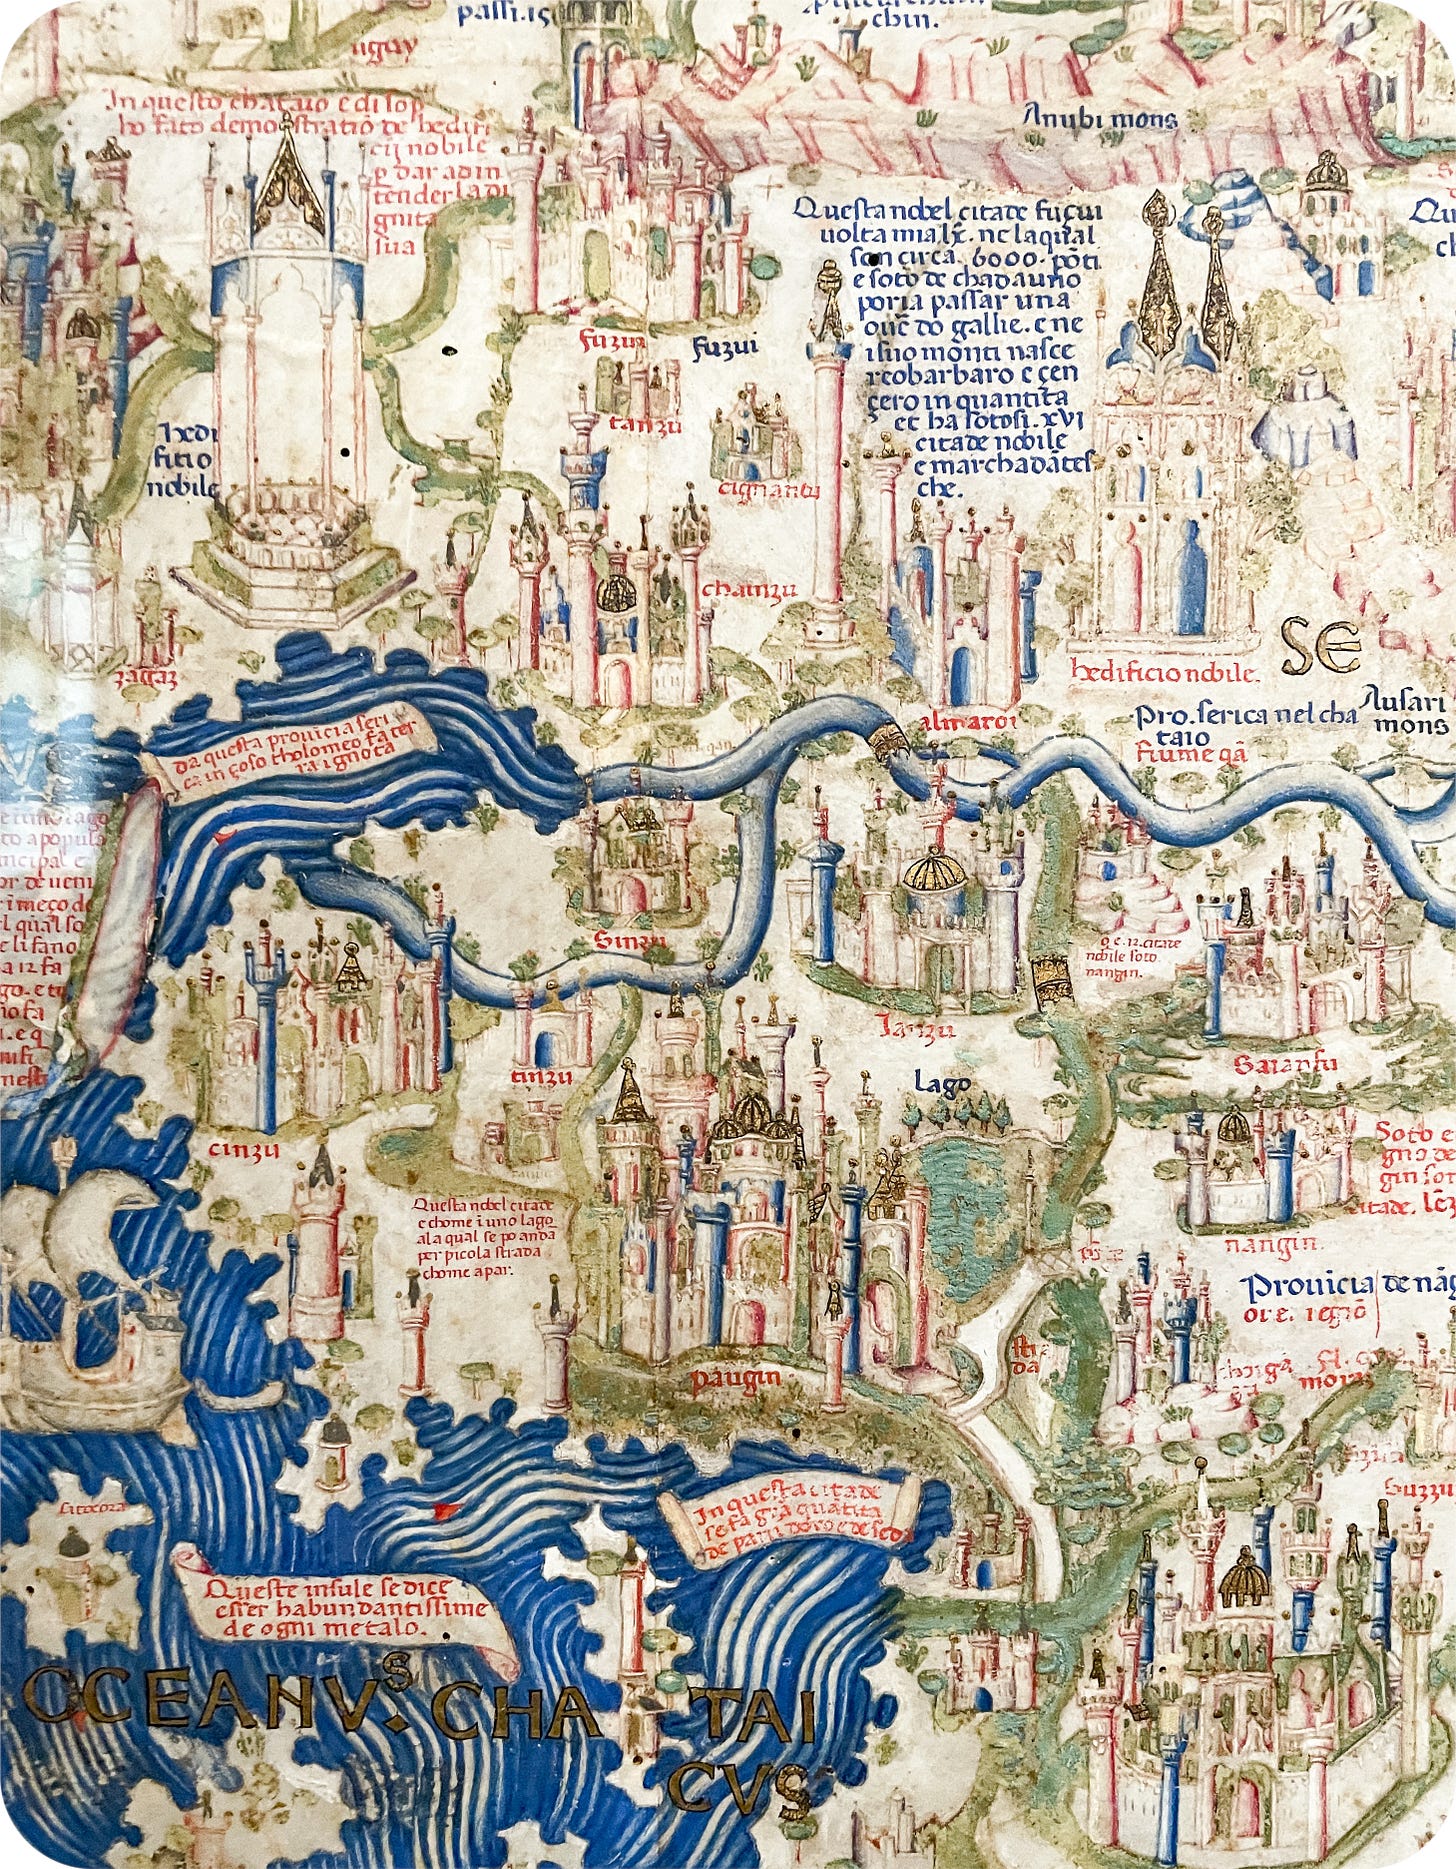 A detail from Fra Mauro's map - Venice, Italy